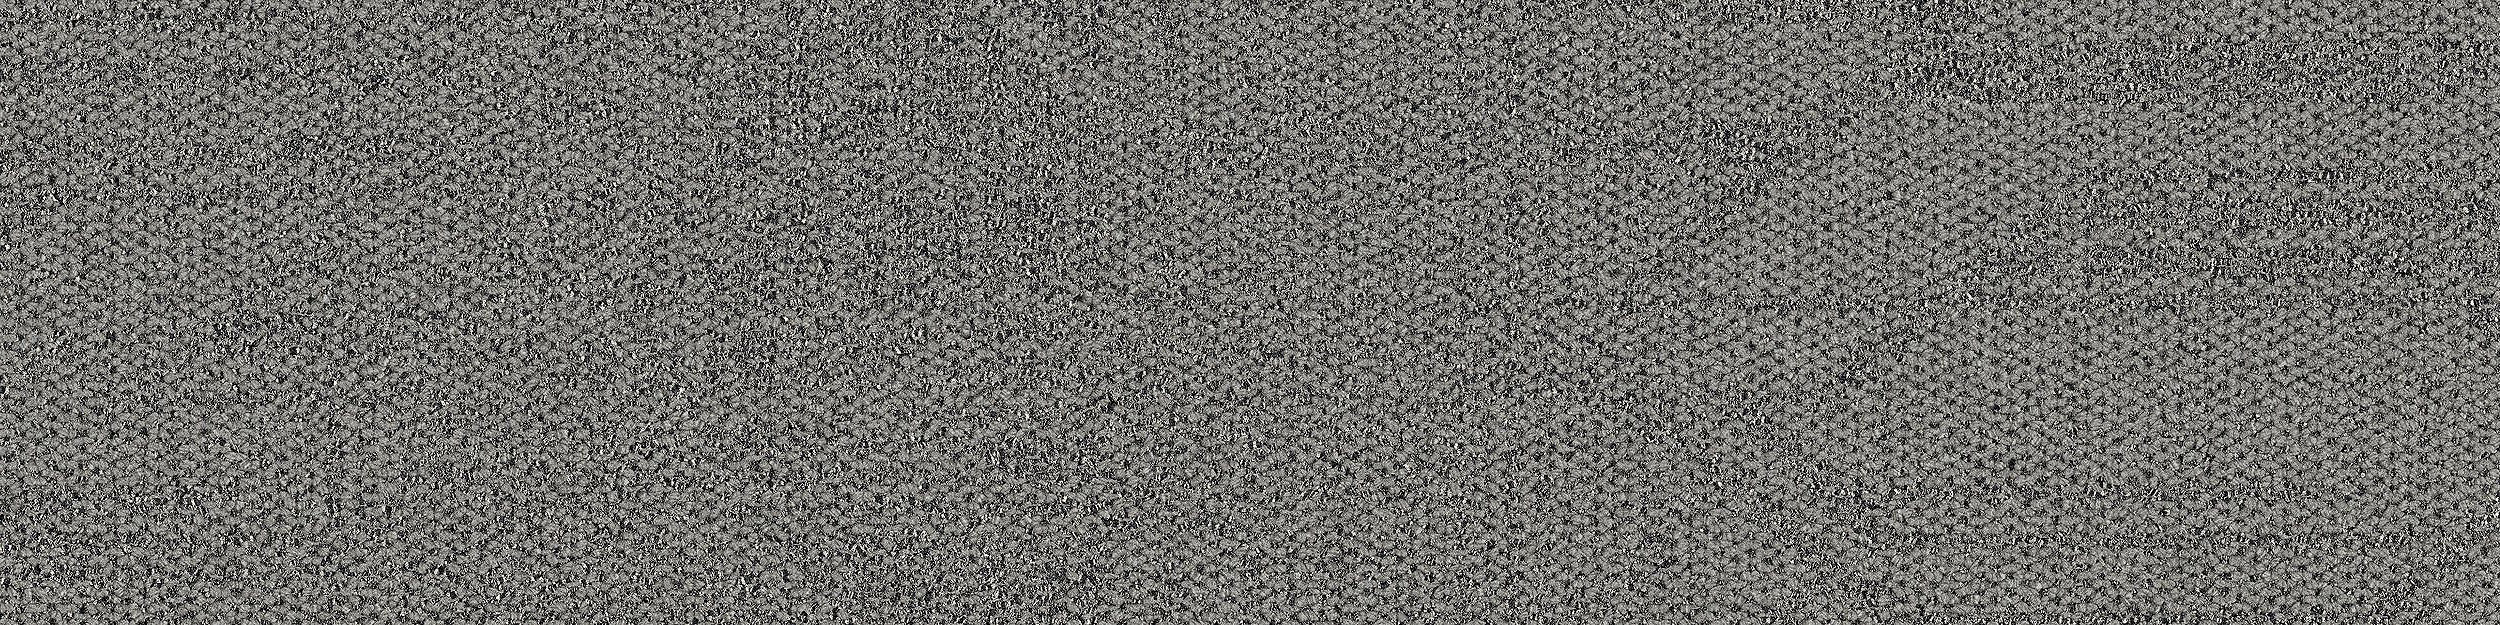 Open Air 411 Carpet Tile In Flannel image number 5